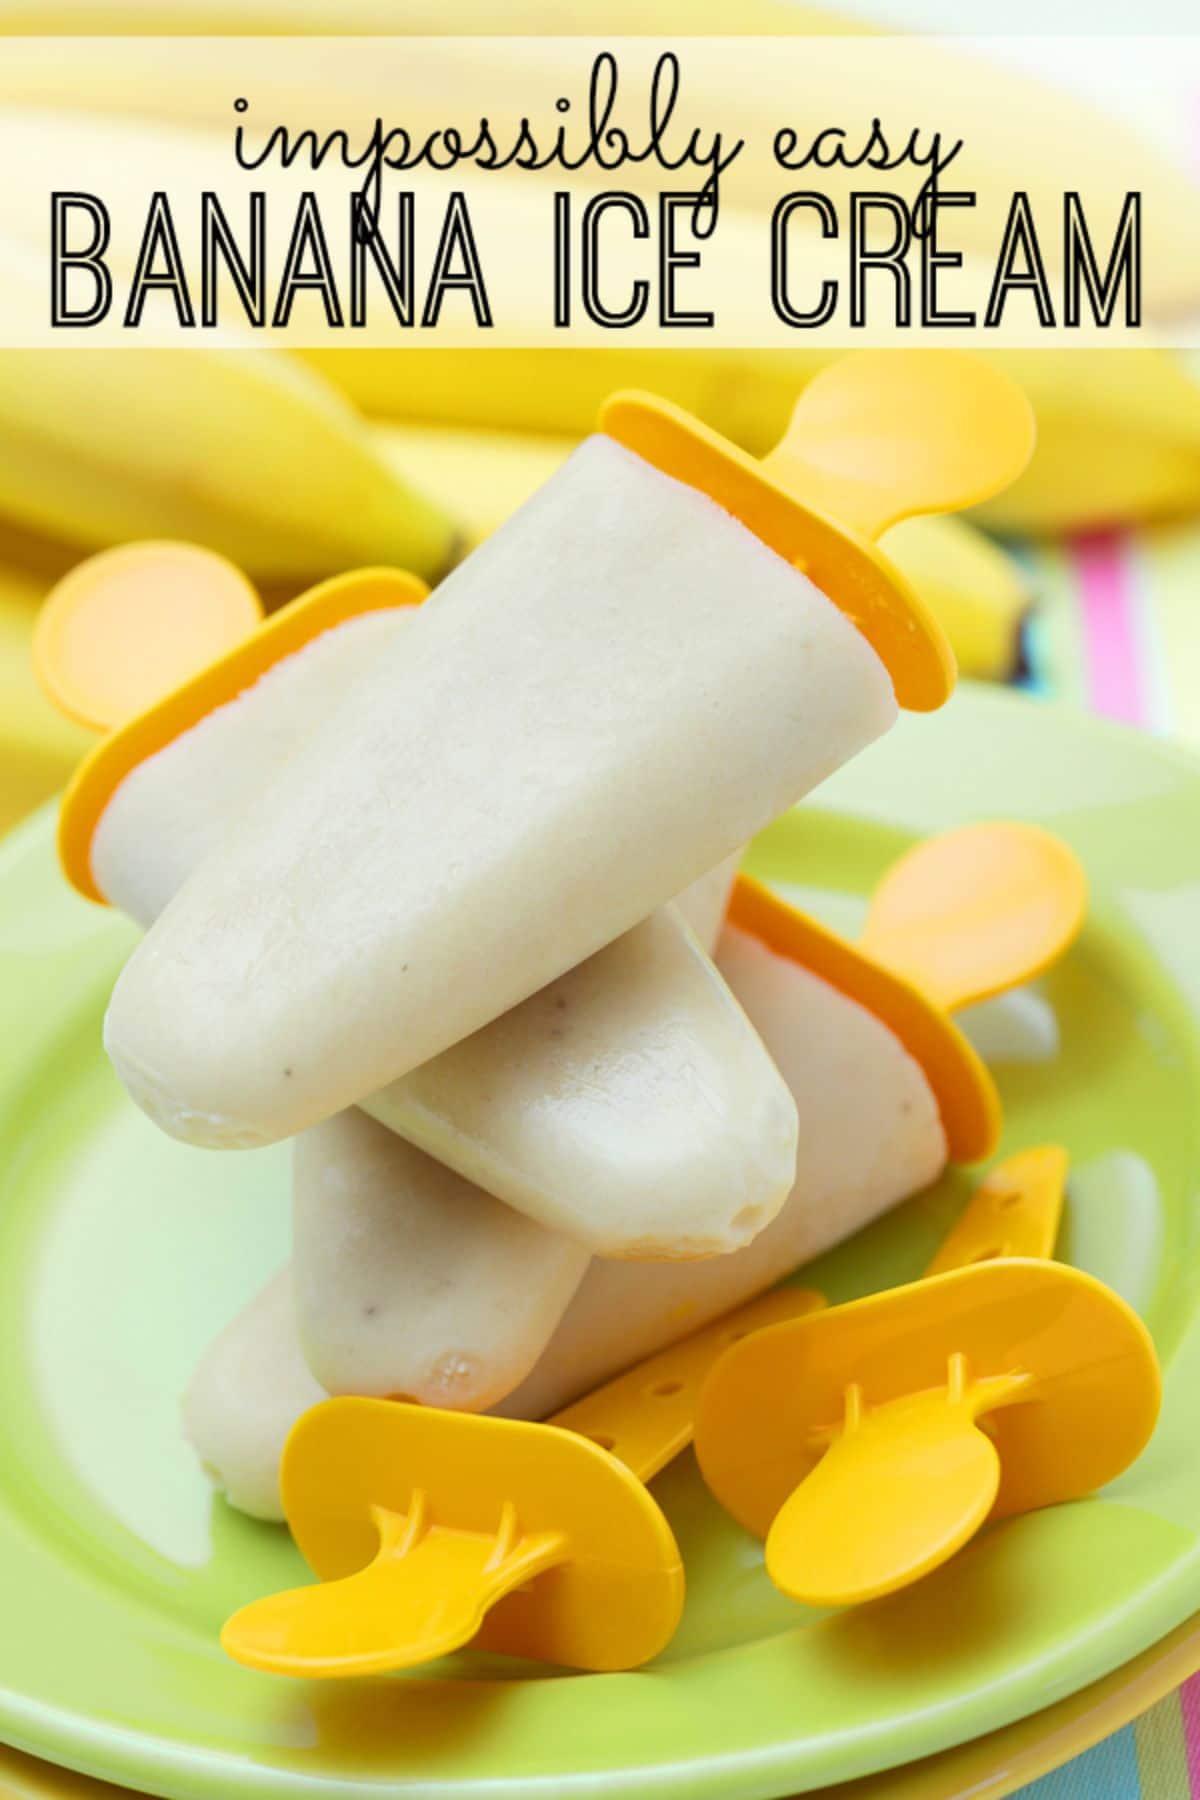 The text is "Impossibly easy banana ice cream" Theimage is of a stack of popsicles on yellow plastic sticks